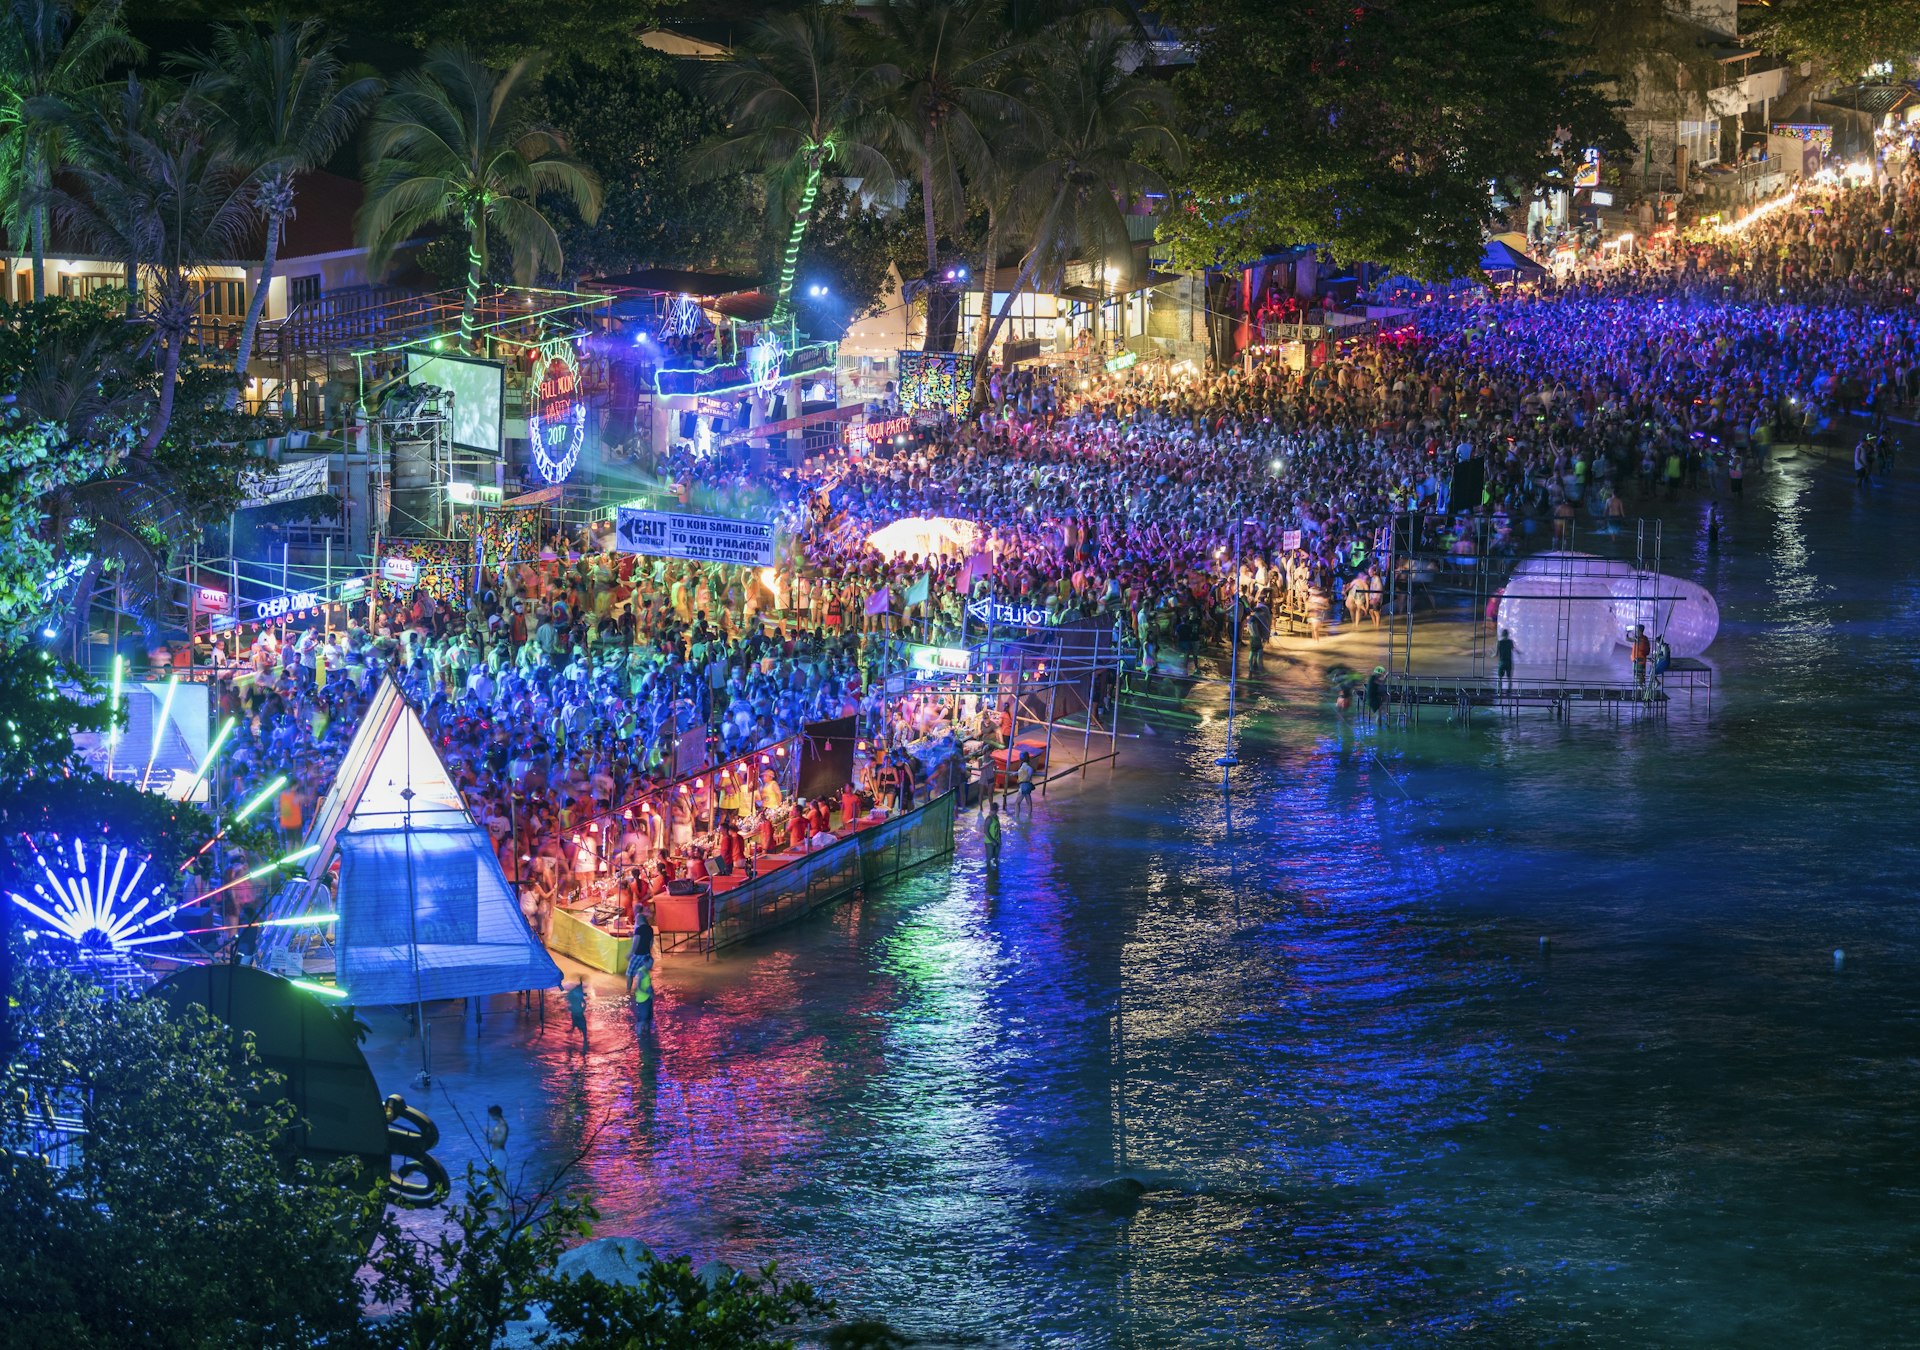 An aerial view of the crowds of people attending the Full Moon Party on Haad Rin beach, Thailand. The beach is completely swamped by people, with lasers and lights painting the crowds in different colours.